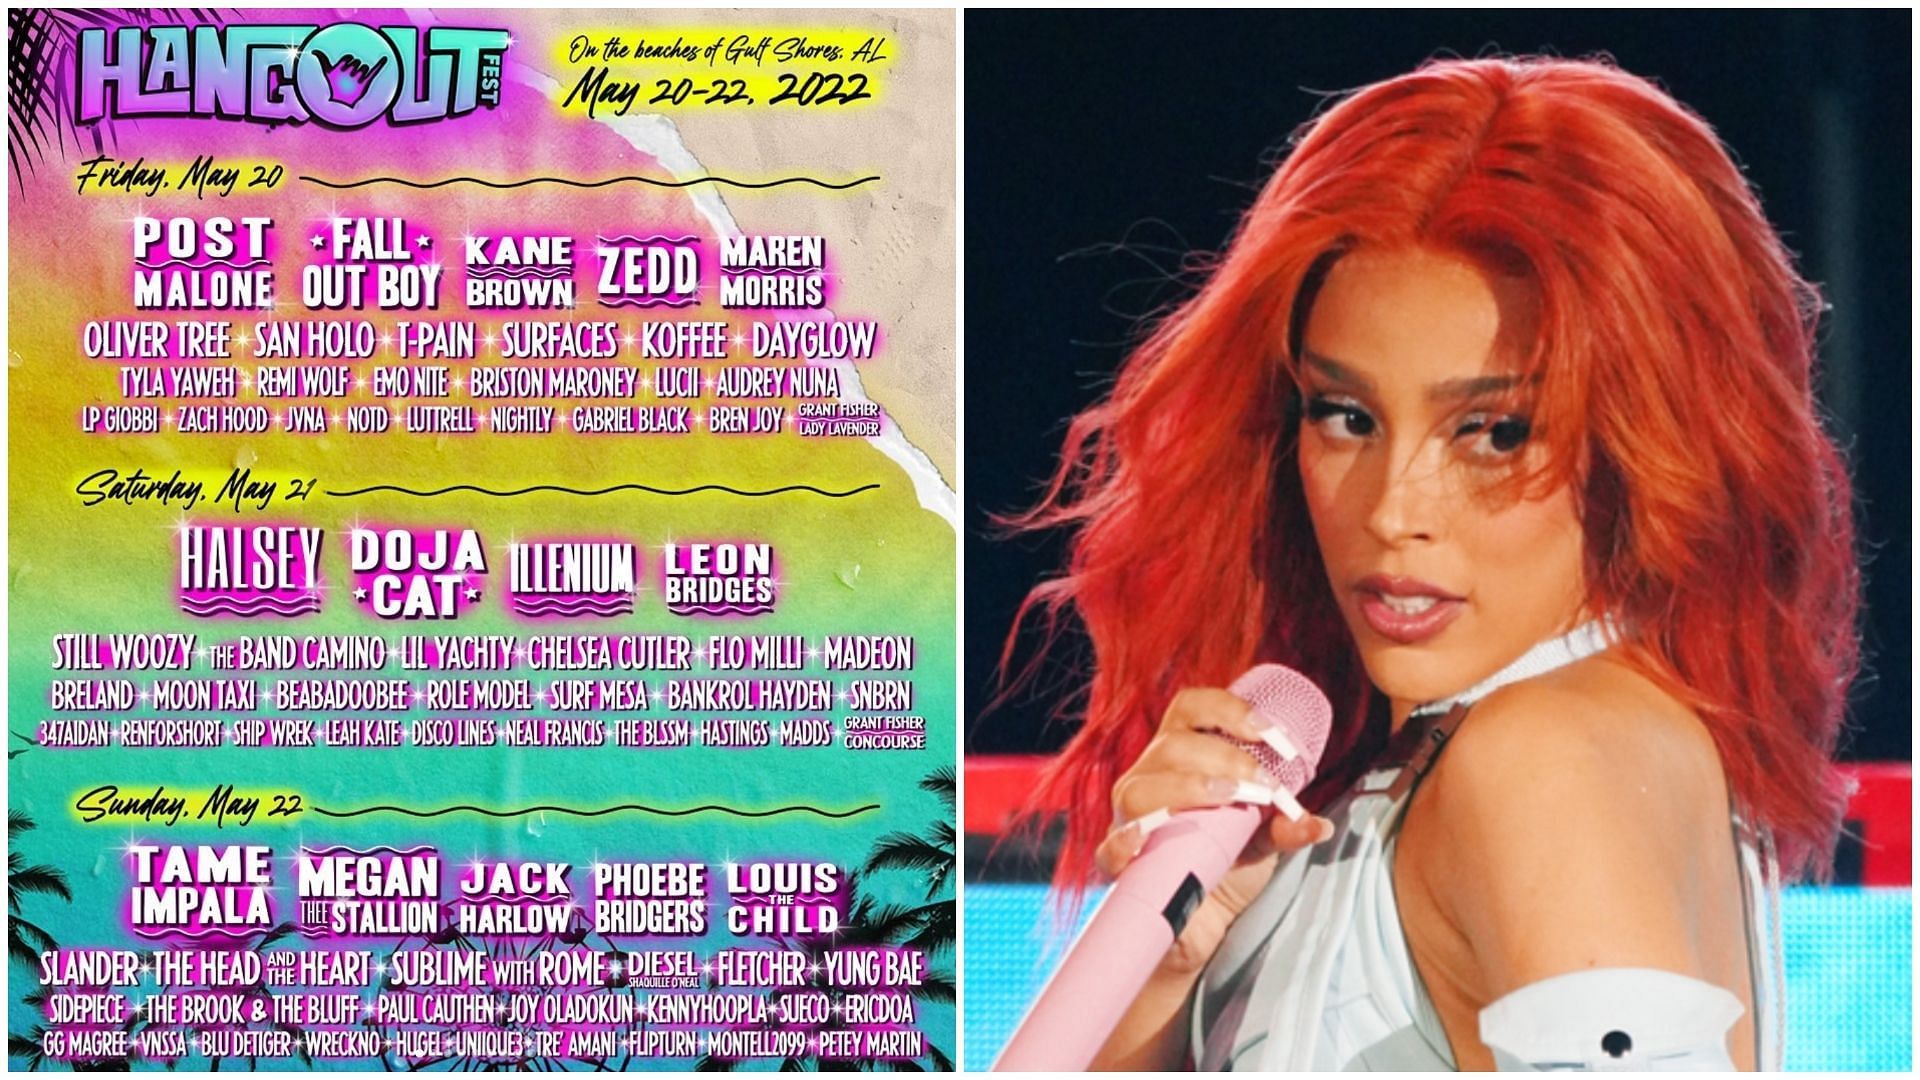 Doja Cat is among the headliners for the Hangout Music Fest slated for May. (Images via Instagram / @hangoutmusicfest and Romain Maurice / Getty)